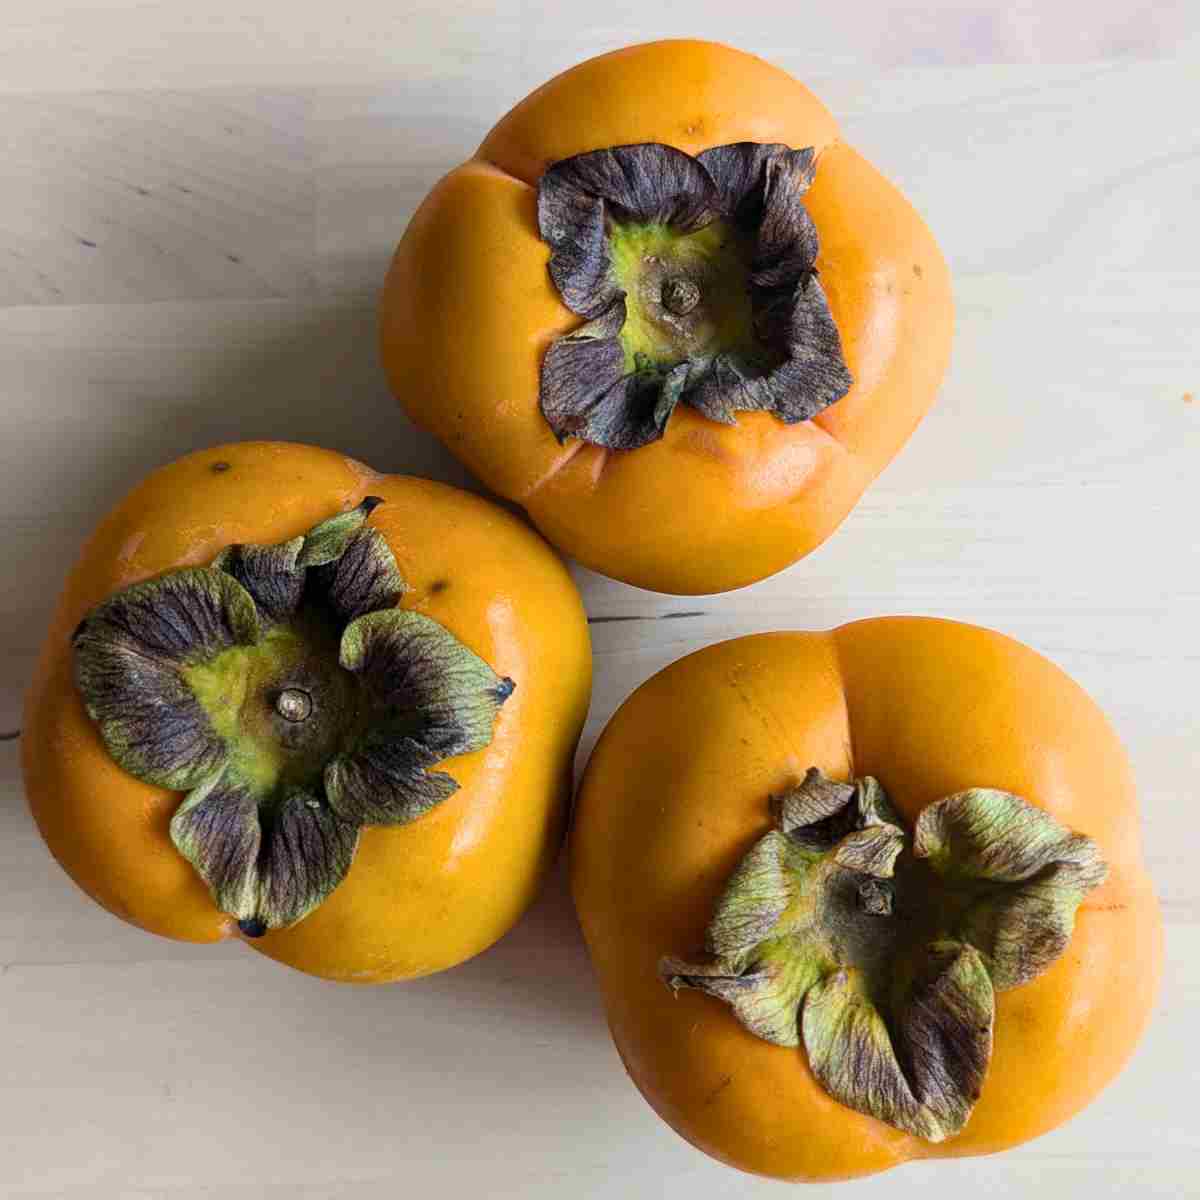 whole persimmon sharon fruit on table